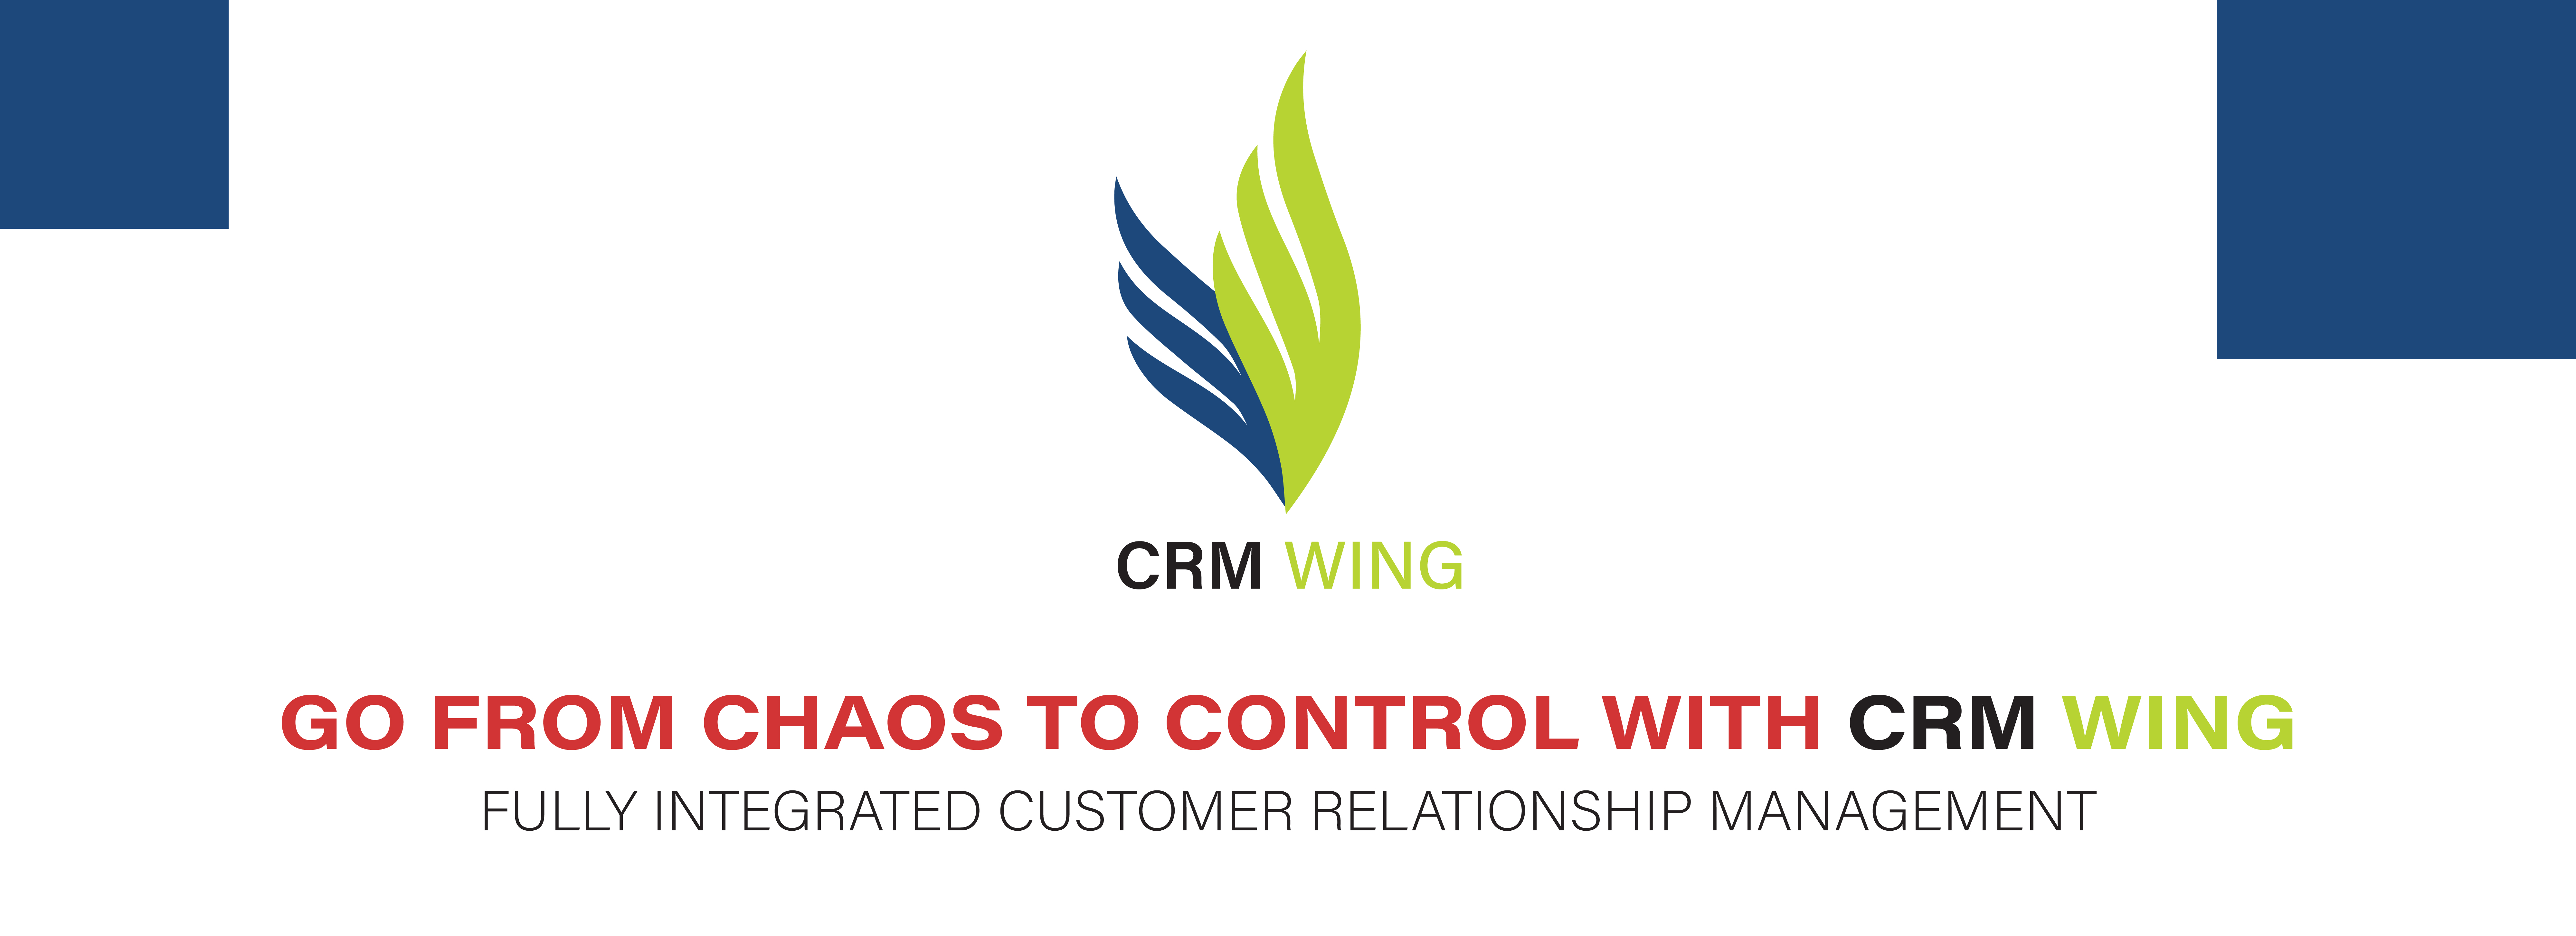 CRM WING